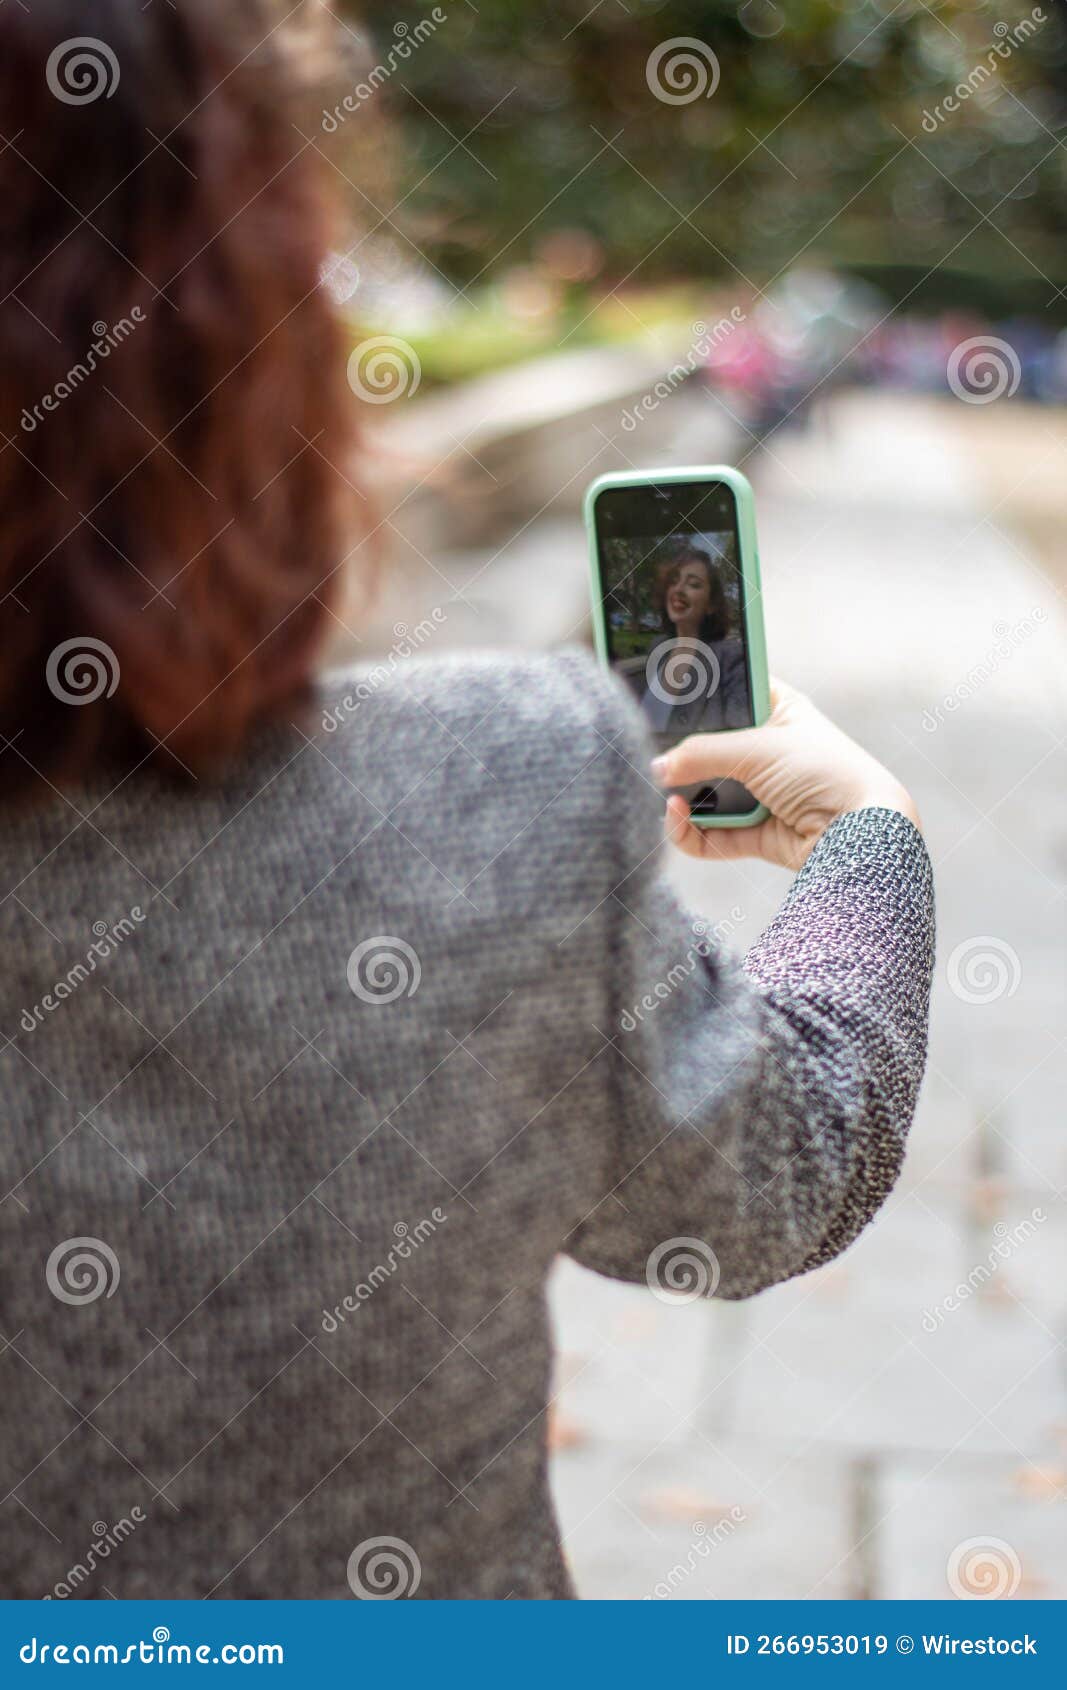 woman taking a selfie with her mobile phone.